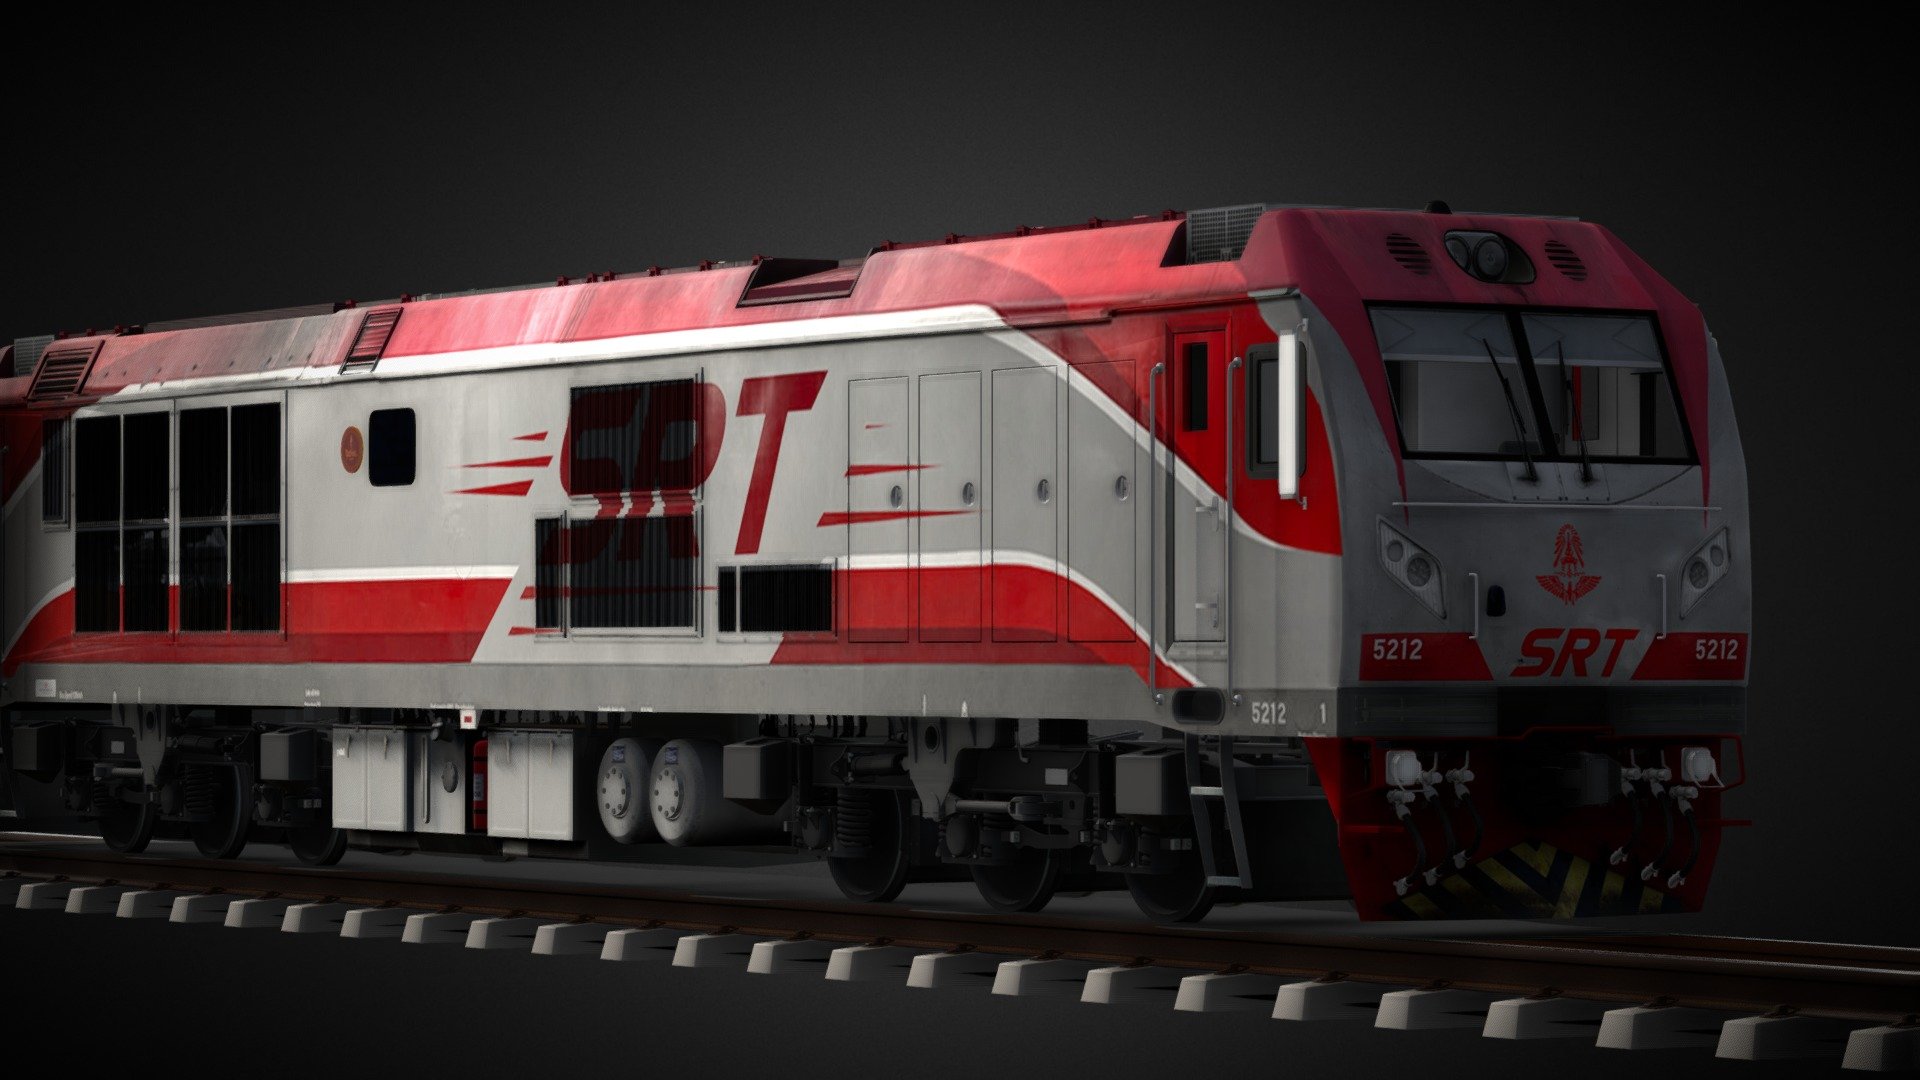 ===CRRC CDA5B1 (QSY)===


            ===Technical data===
Company owner      : State Railway of Thailand
Nickname              : Ultraman
Power Source         : Diesel Electric
Manufacturer          : CRRC Qishuyan co.,ltd
Model               : CDA5B1
Active duty         : 2022 - Present
Quantity            : 50 units

         ===Locomotive Information===
Type                 : Diesel-electric locomotive
standard way width       : 1.000 meters
wheel arrangement     : Co-Co
Length              : 20,000 mm.
Width               : 2,836 mm.
Height              : 4,000 mm.
Standing            : weight 96 tons
Axle press         : 16tons / Axle (U16)
Fuel tank capacity       : 4,500 litres
Brake system           : Air brake
Number of Cabin        : 2 sides

            ===Performance===
Engine power       : 3,218 horsepower
Maximum speed      : 120 km/h

   ===Model BY SRT Mods Trainz Thailand===

            ===Texture BY NightNyZ15===
 - CRRC CDA5B1 5212 (QSY) Locomotive for Thailand - 3D model by BoonKub! (@BoonKub5212) 3d model